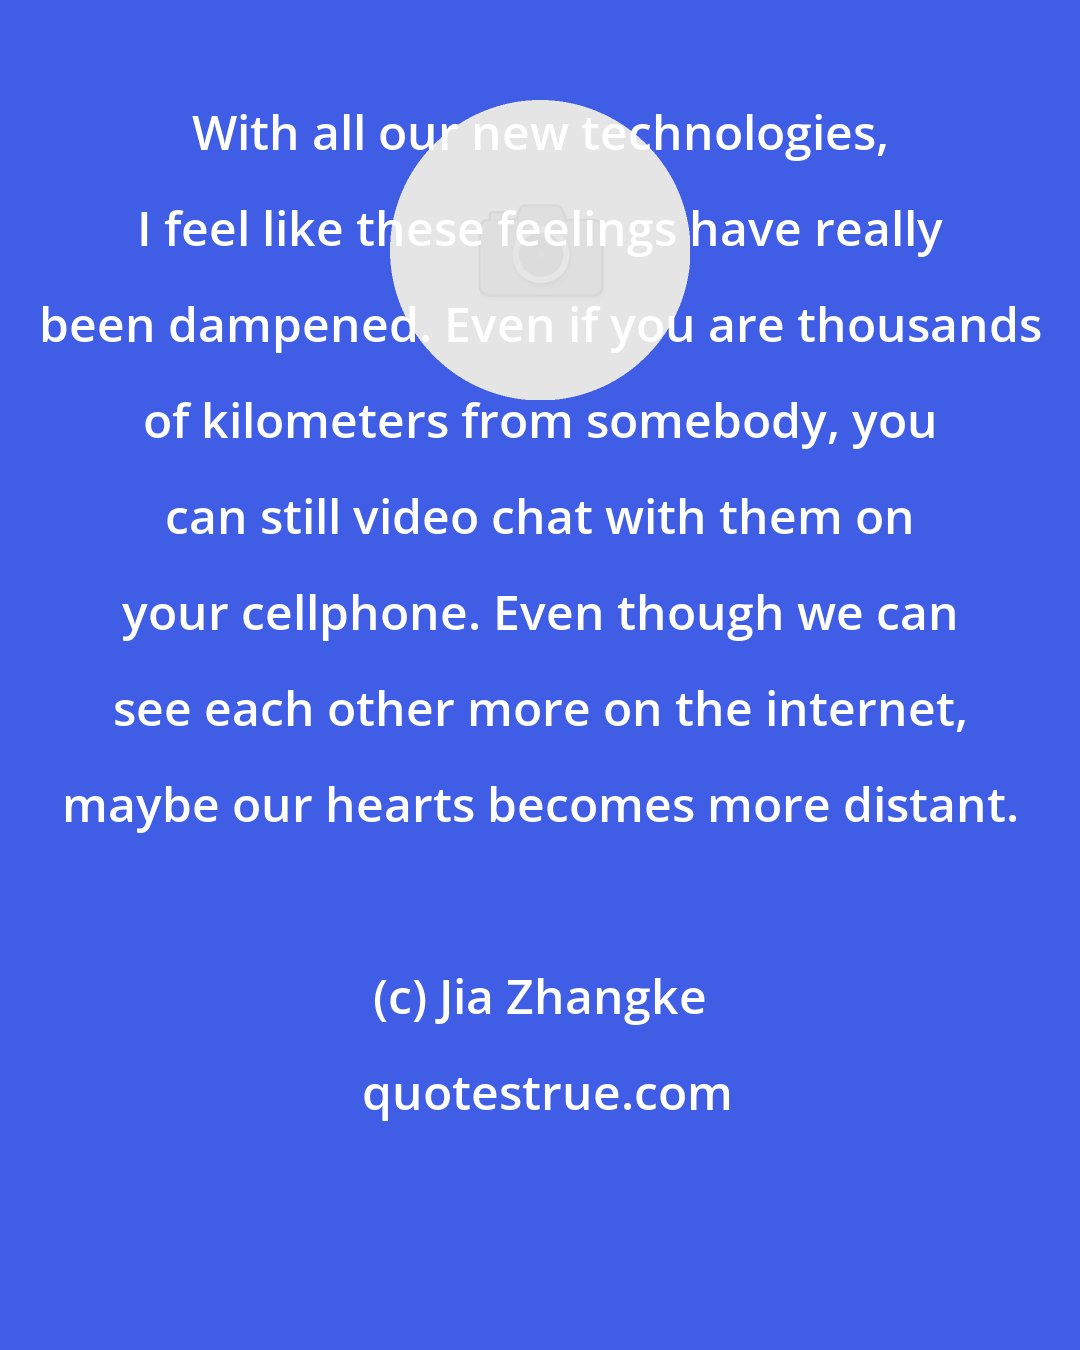 Jia Zhangke: With all our new technologies, I feel like these feelings have really been dampened. Even if you are thousands of kilometers from somebody, you can still video chat with them on your cellphone. Even though we can see each other more on the internet, maybe our hearts becomes more distant.